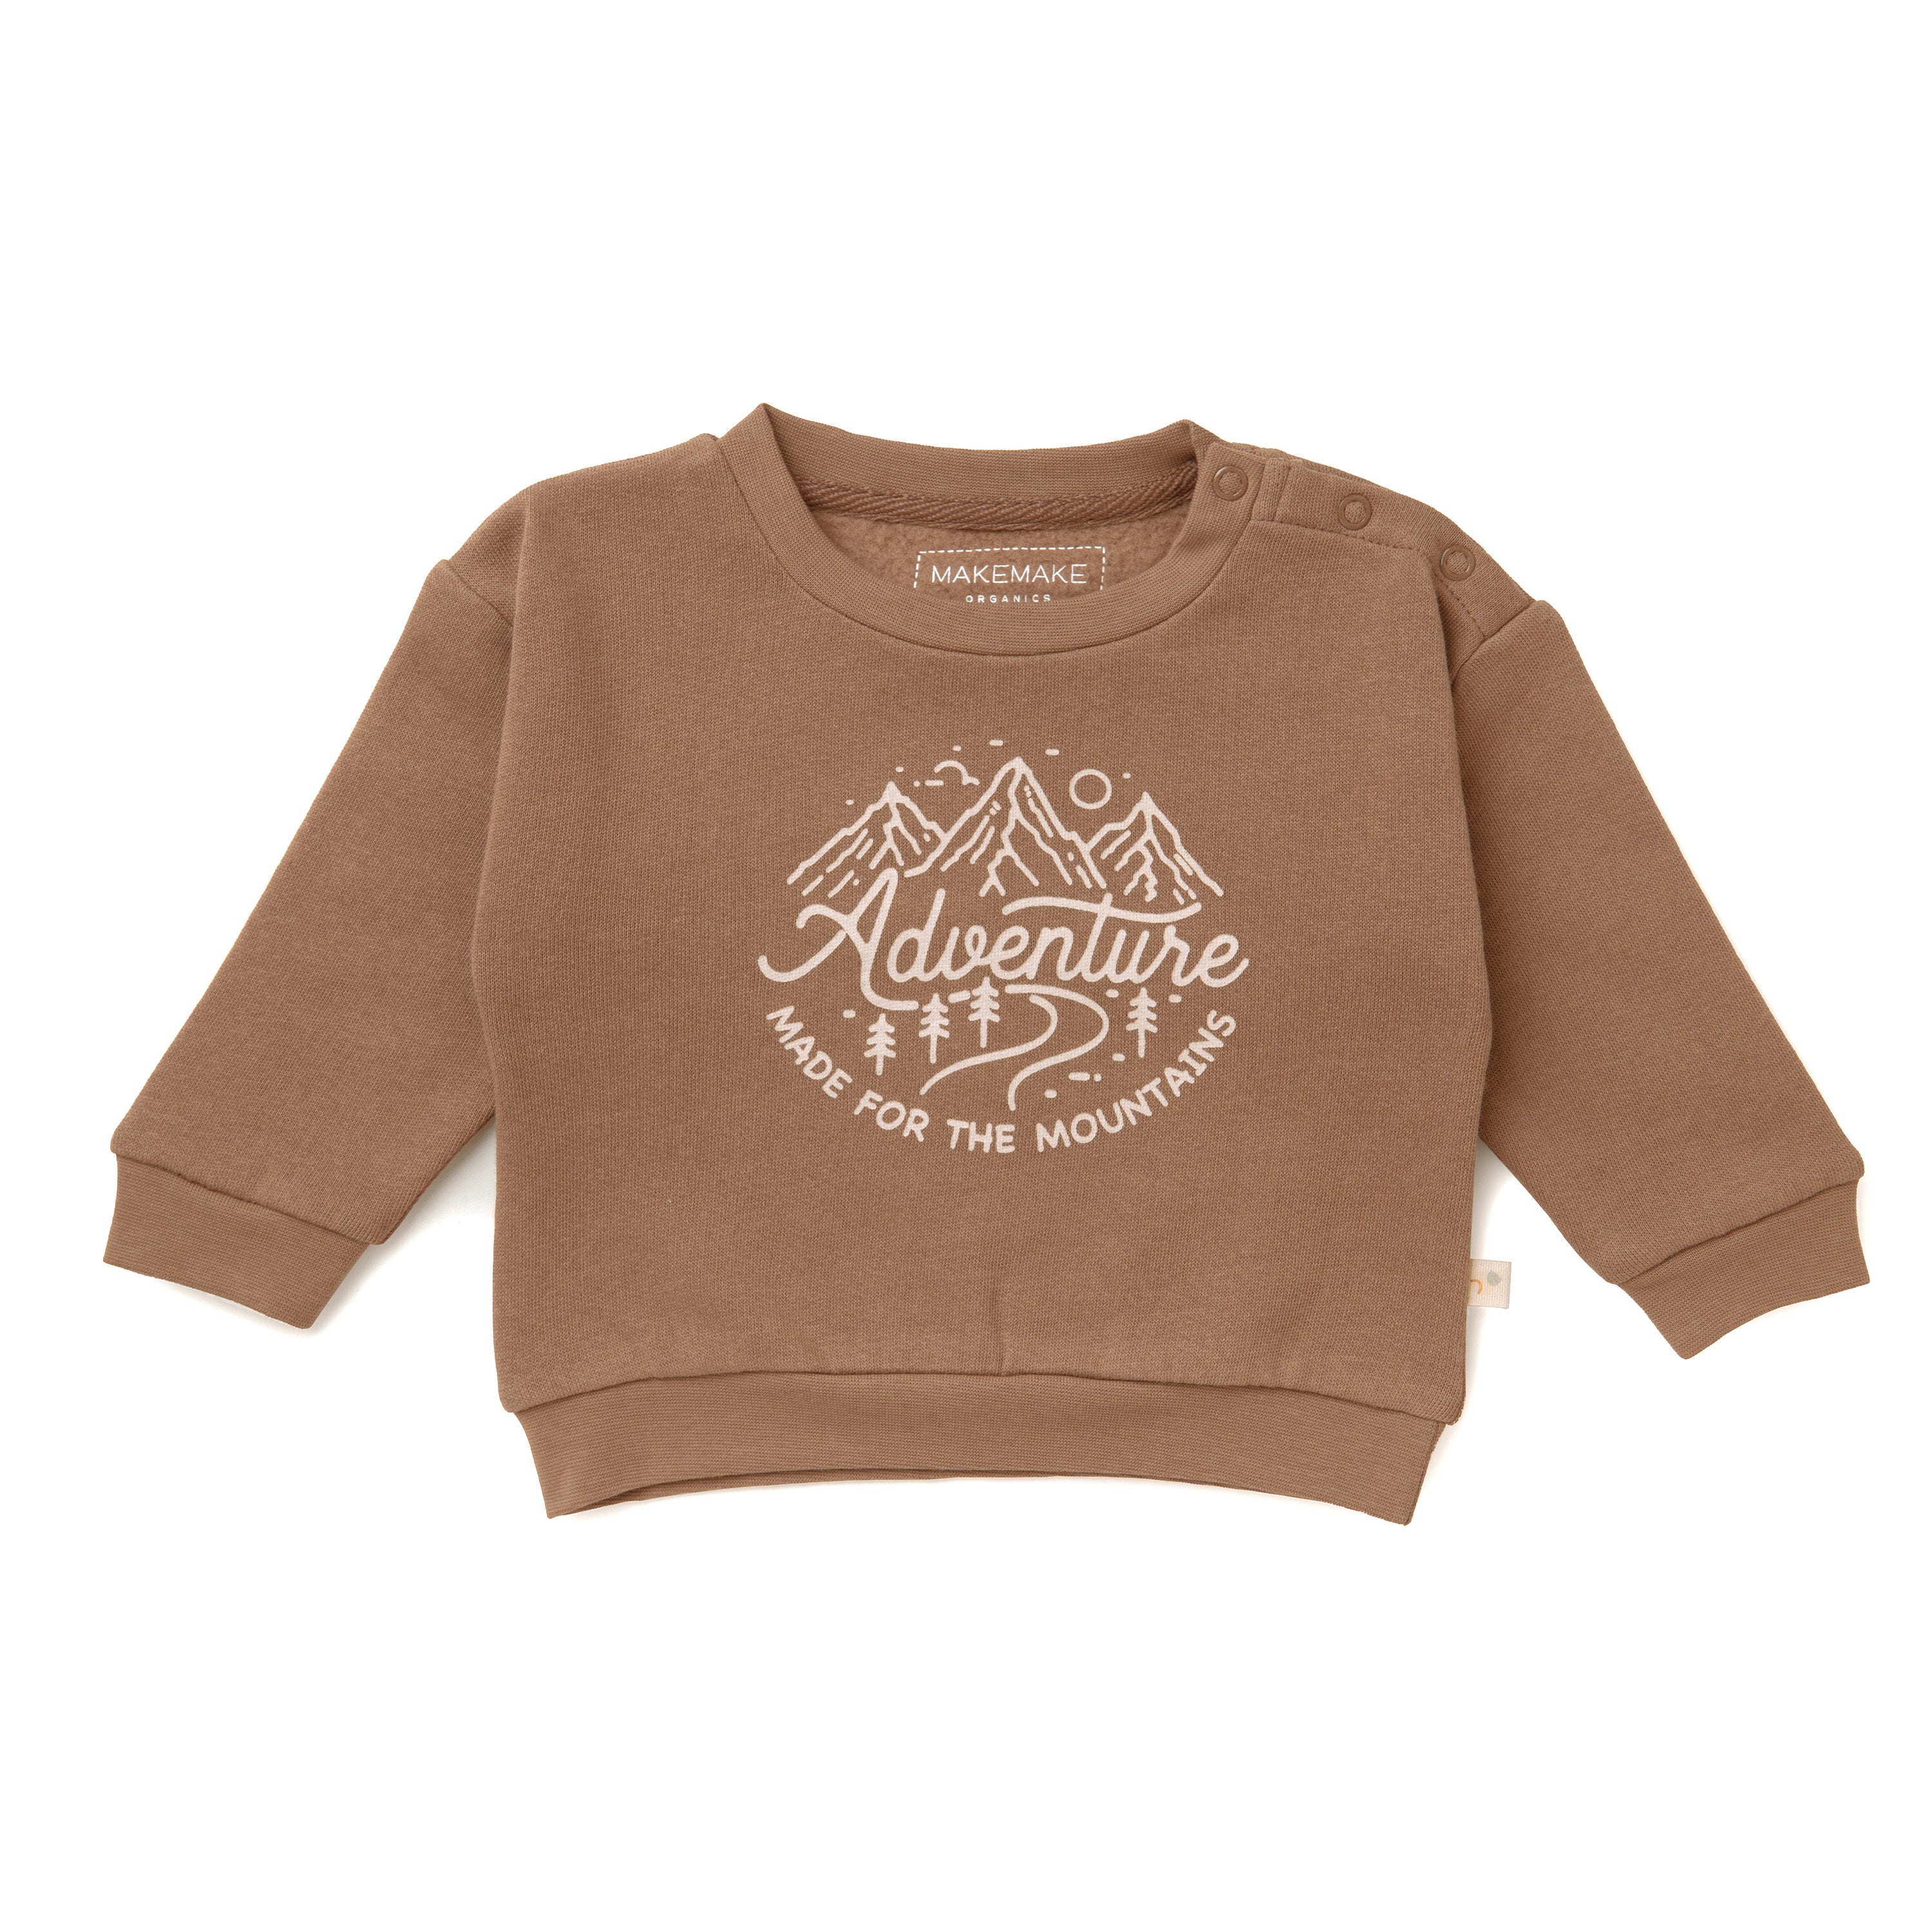 Organic Baby brown children's sweatshirt with the words "adventure" printed in white. The shirt has snap buttons on the left shoulder.